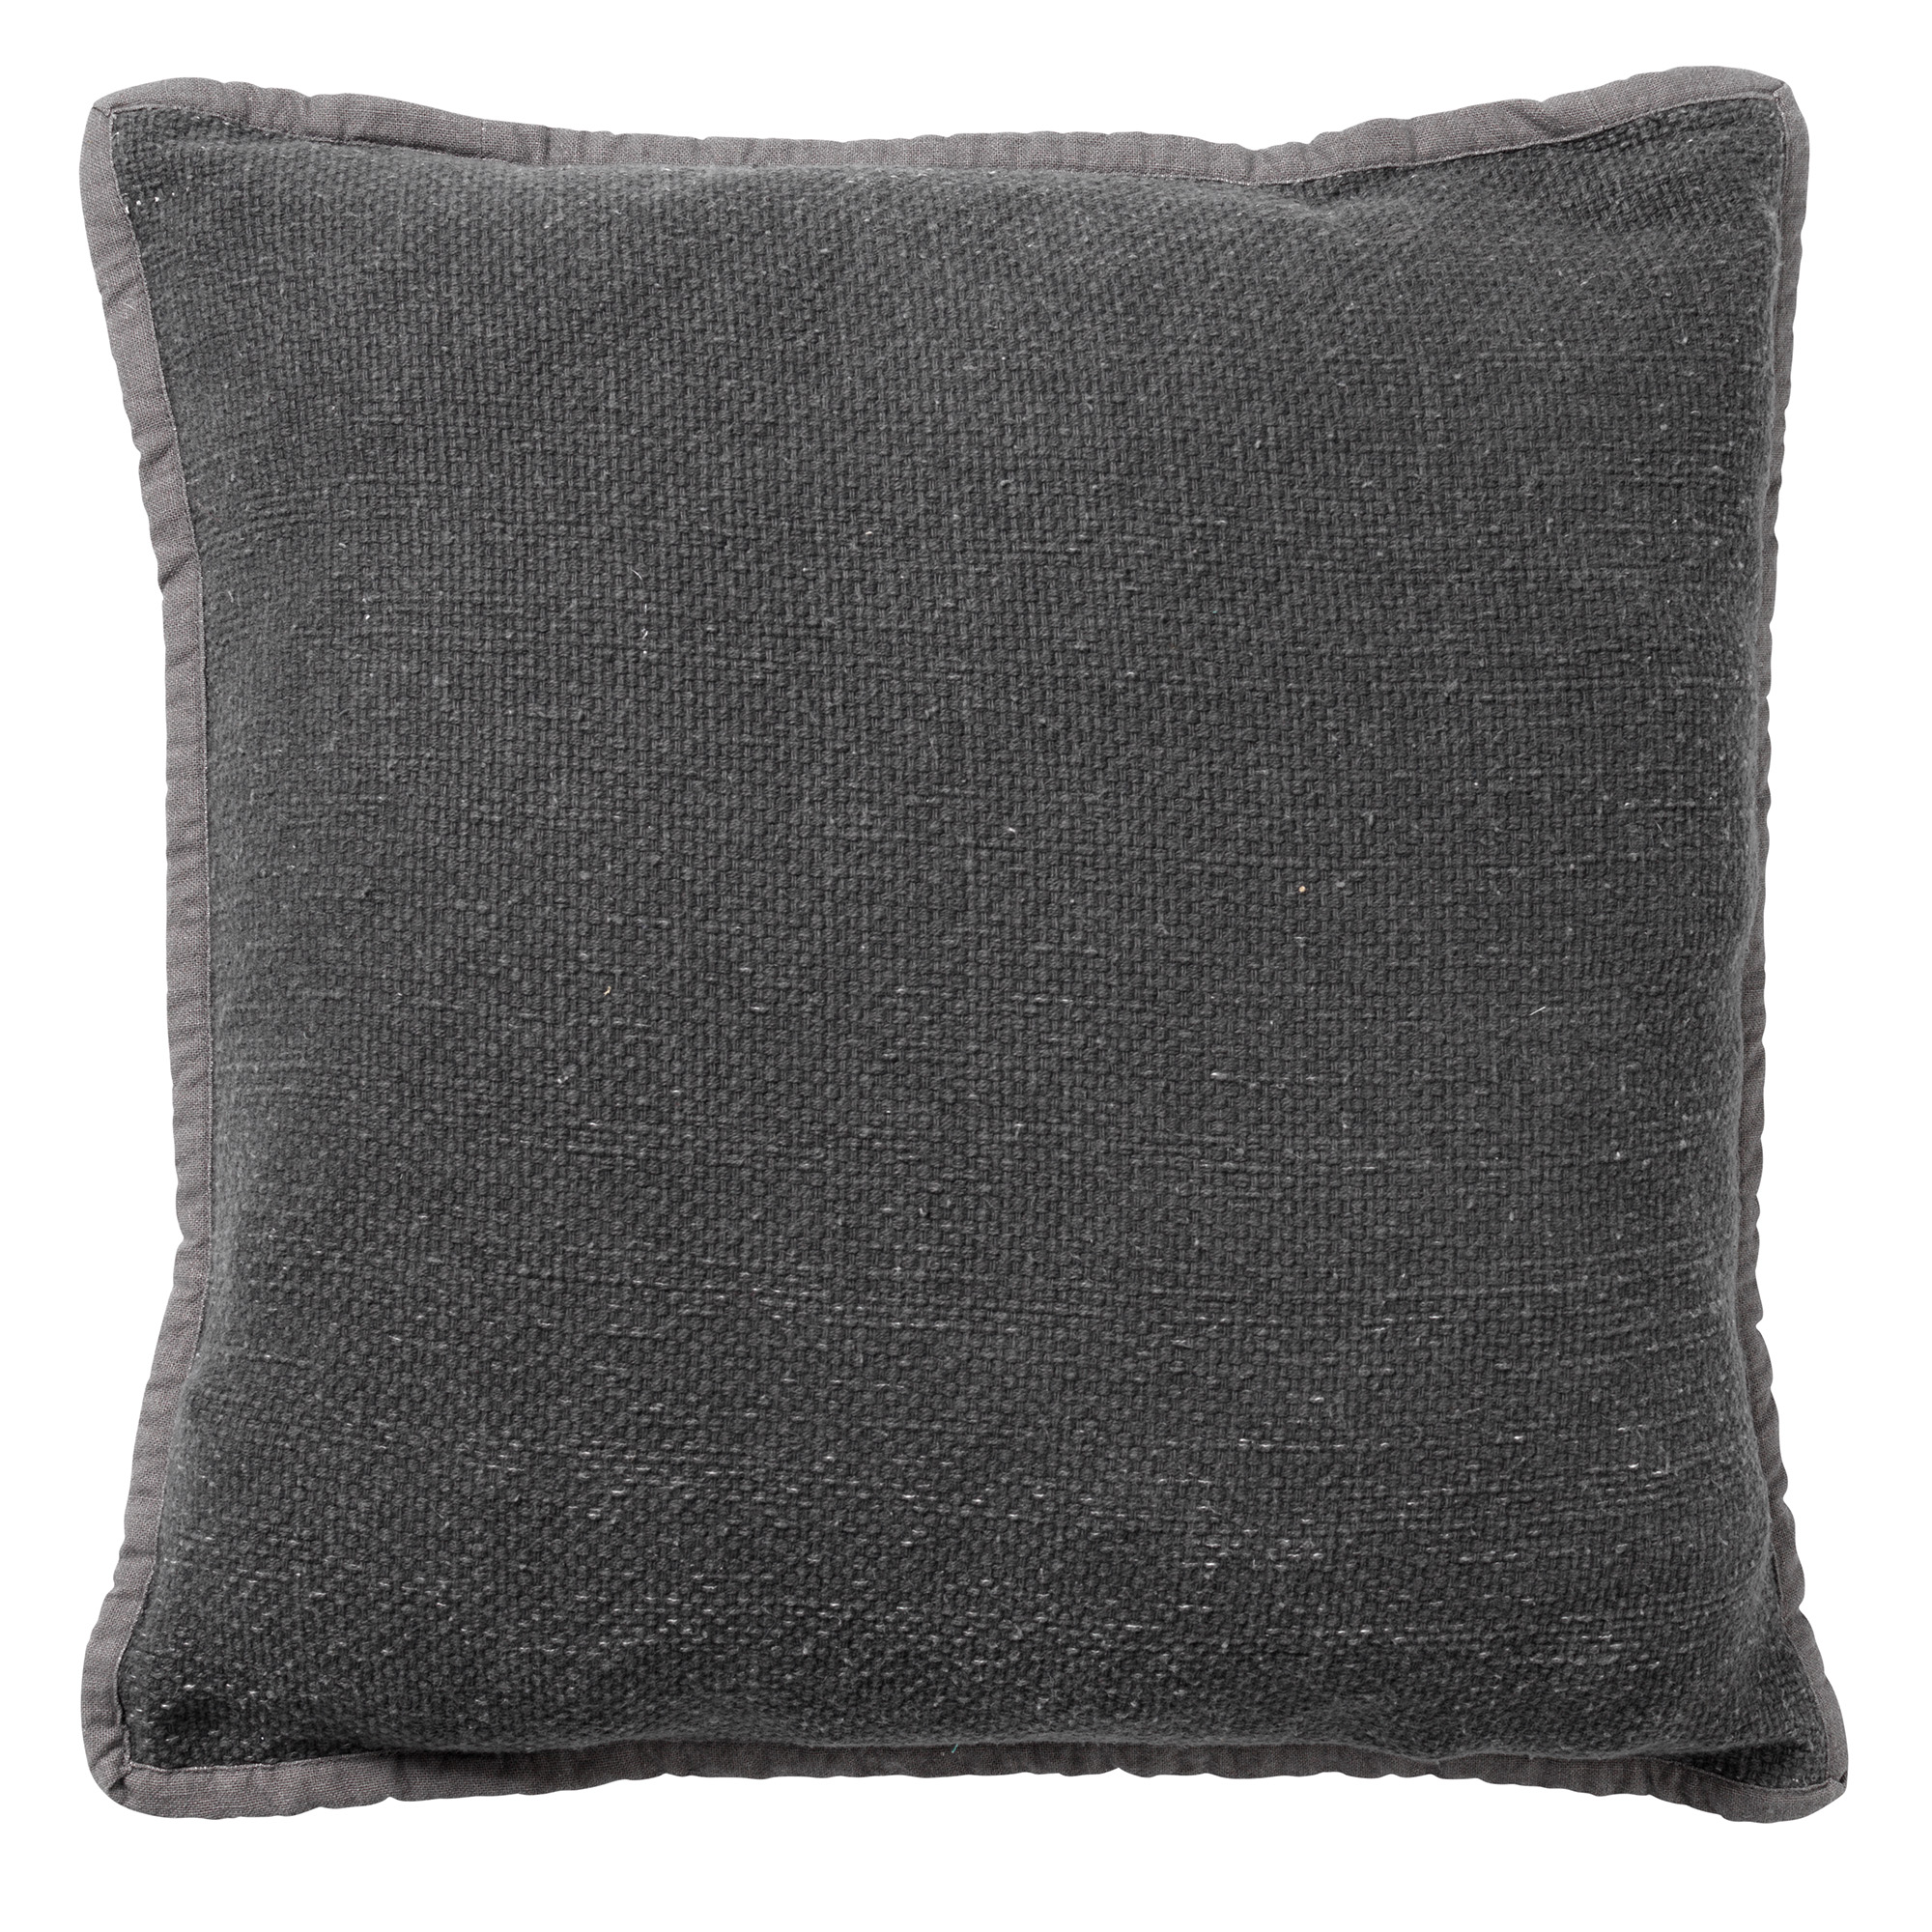 BOWIE - Cushion 45x45 cm Charcoal Gray - anthracite